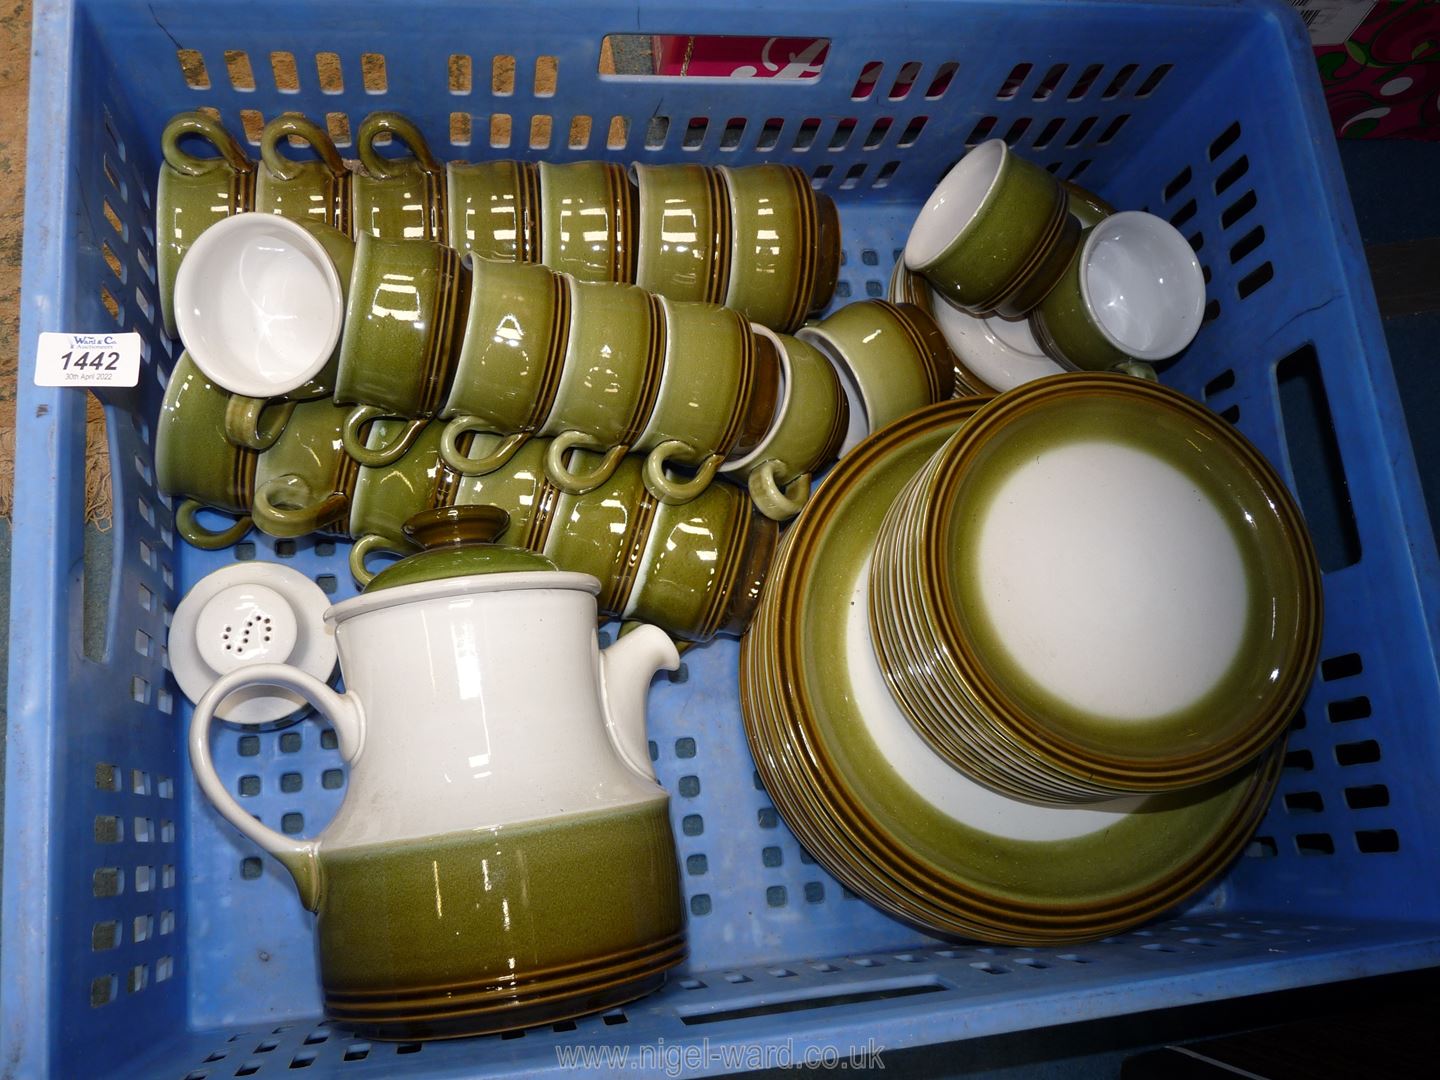 Denby Rochester tea and dinnerware including a teapot, cups and saucers, side plates,